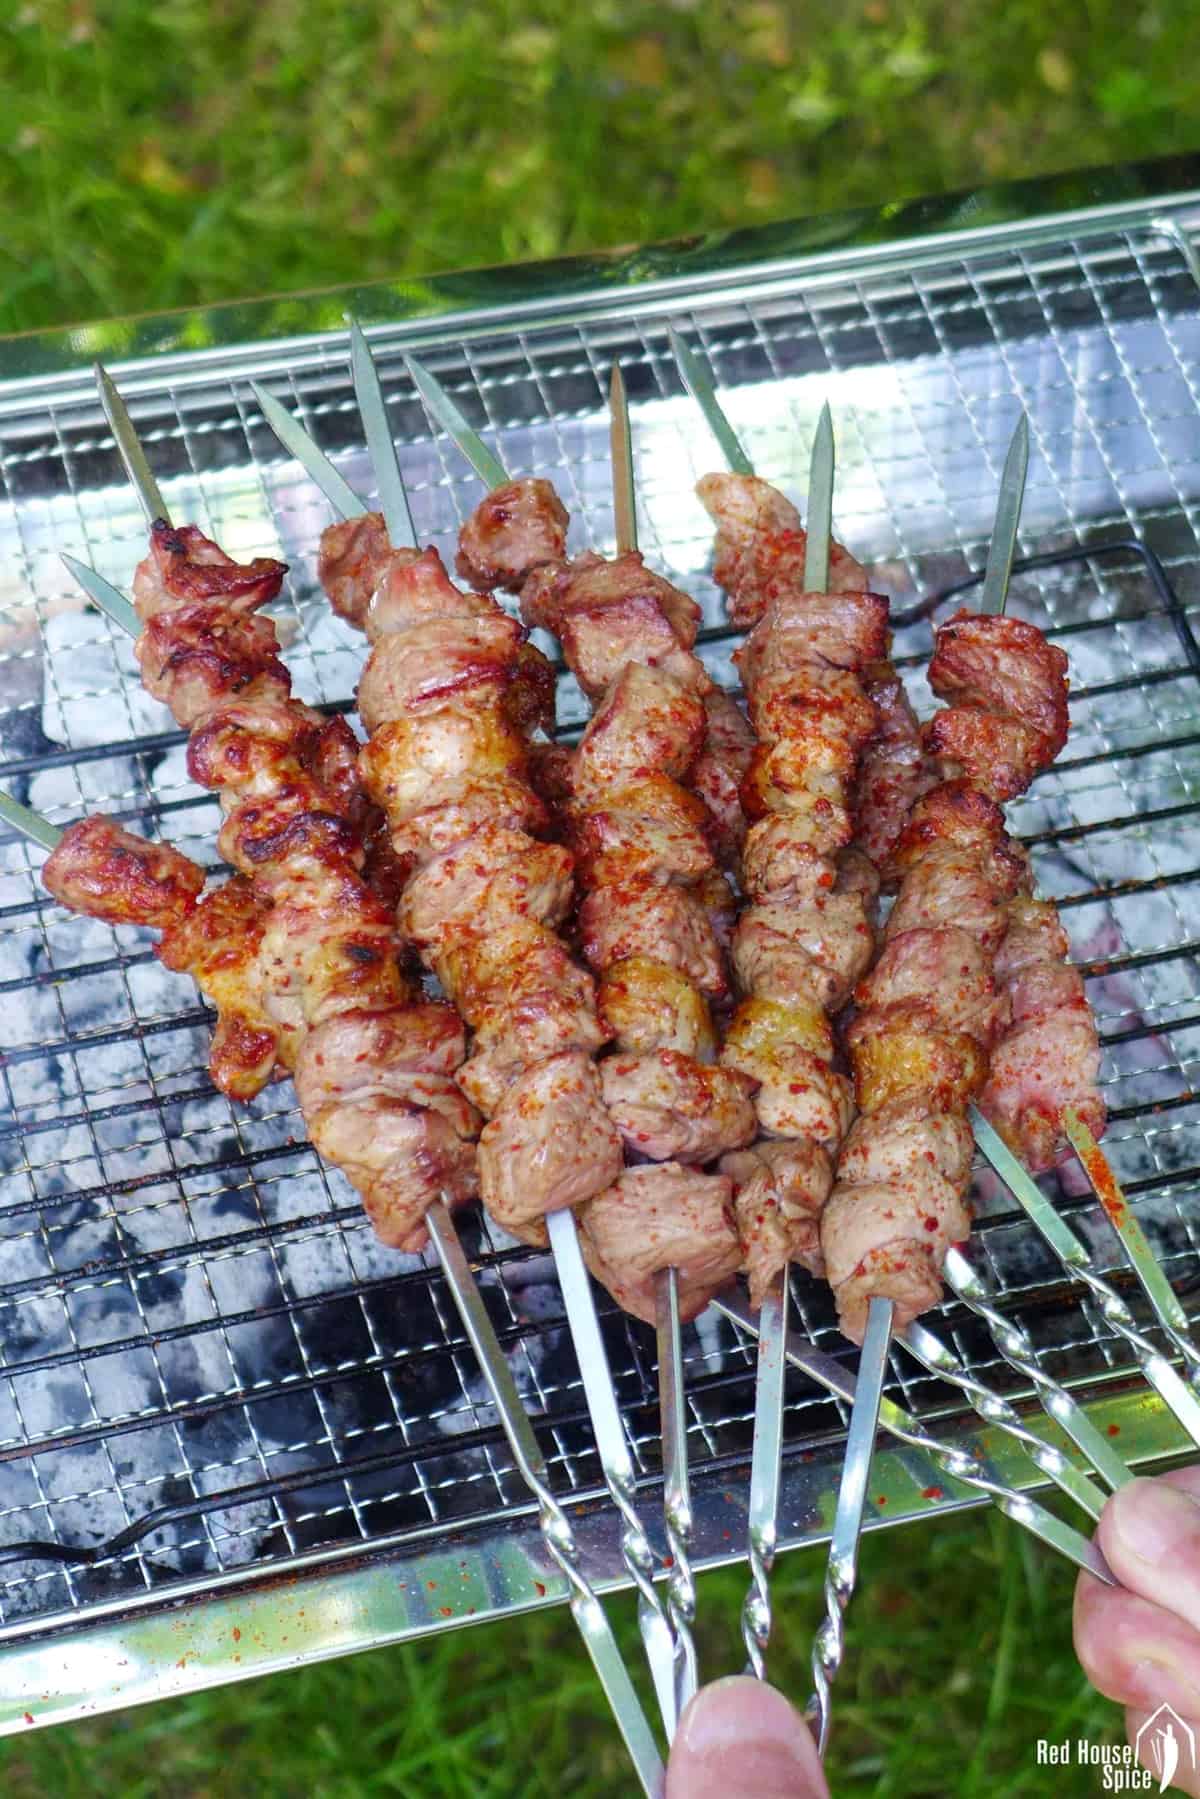 Chinese lamb skewers held by two hands